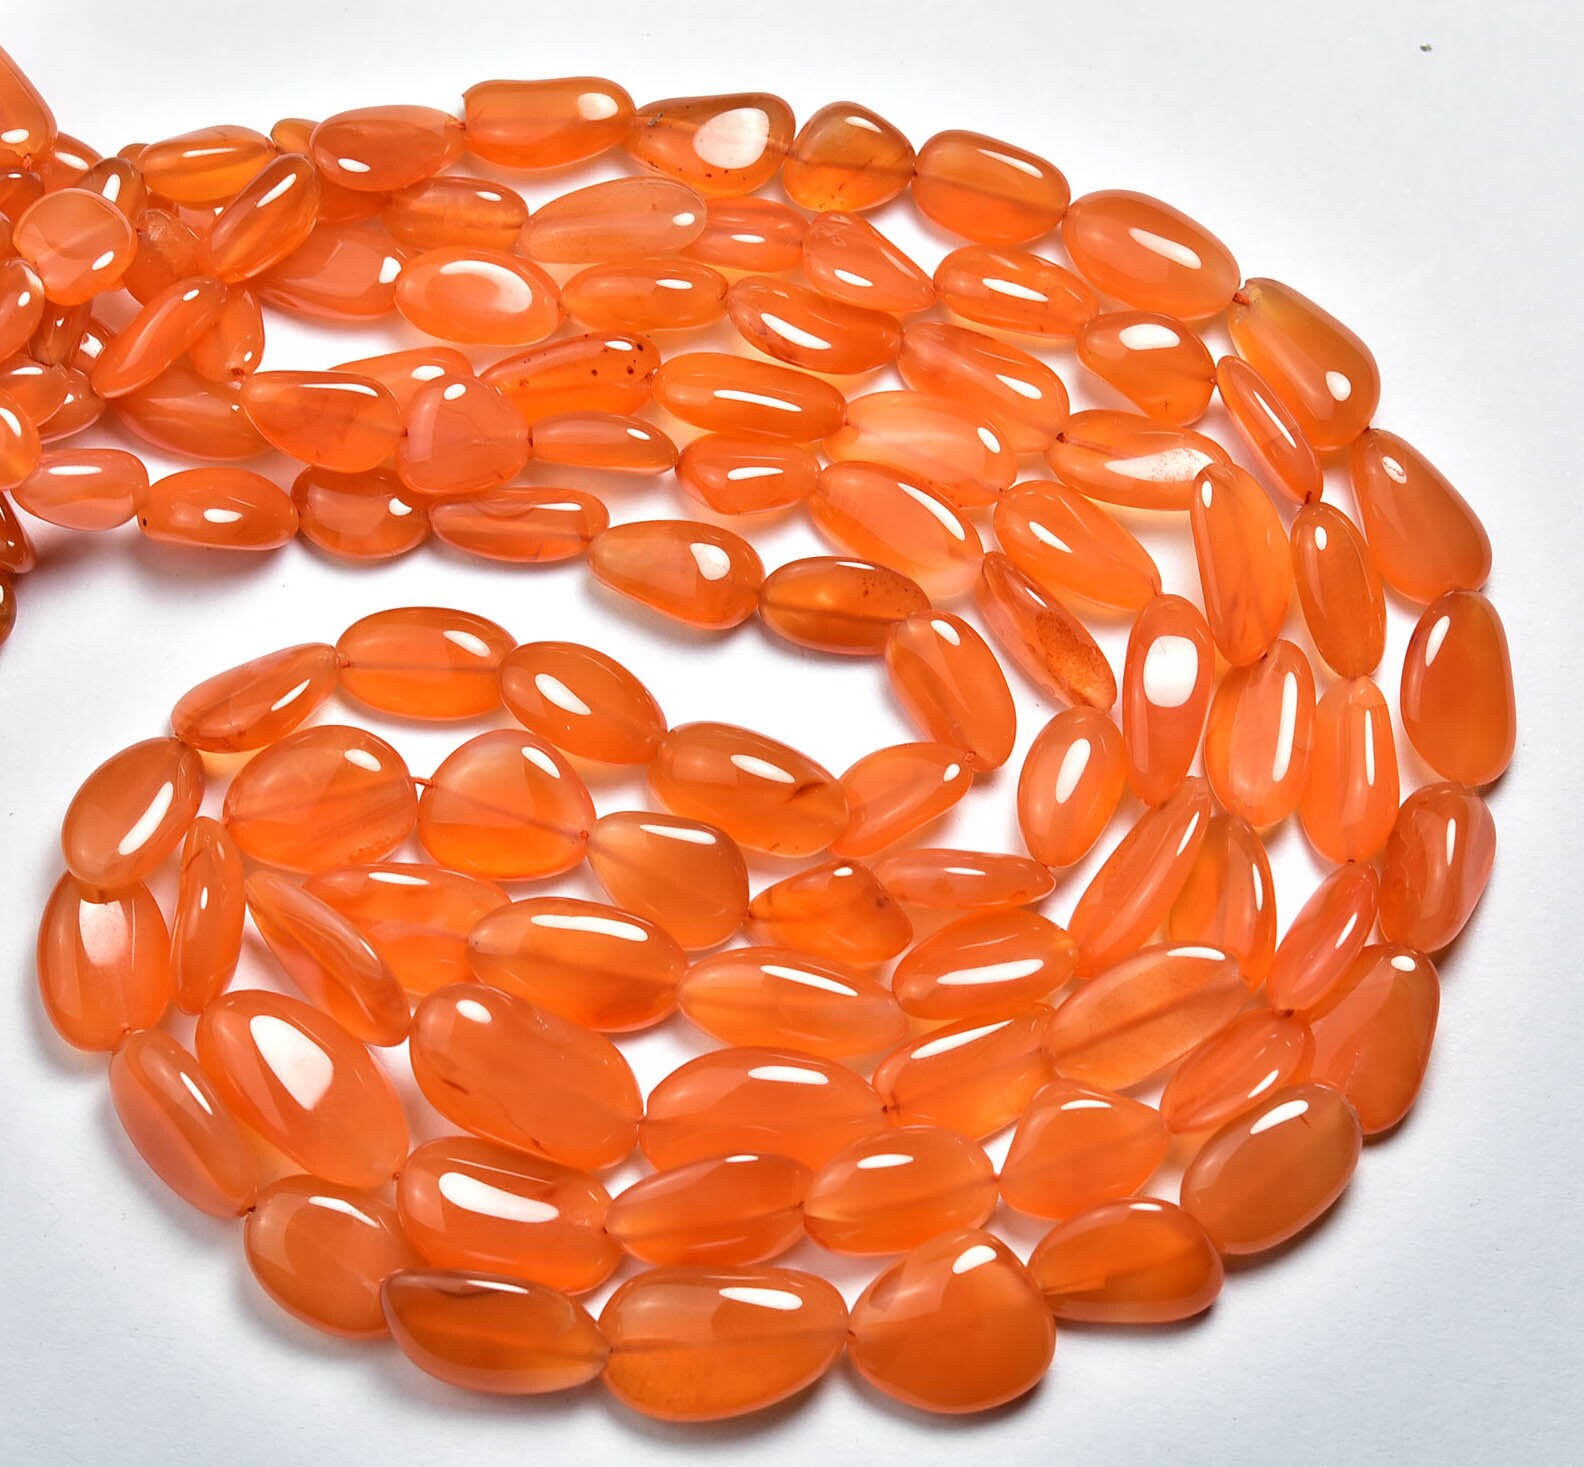 Super Quality Carnelian Nugget Bead - 9 Inches - Beautiful Natural Smooth Carnelian Nuggets - Size Is 10 - 16 Mm #050